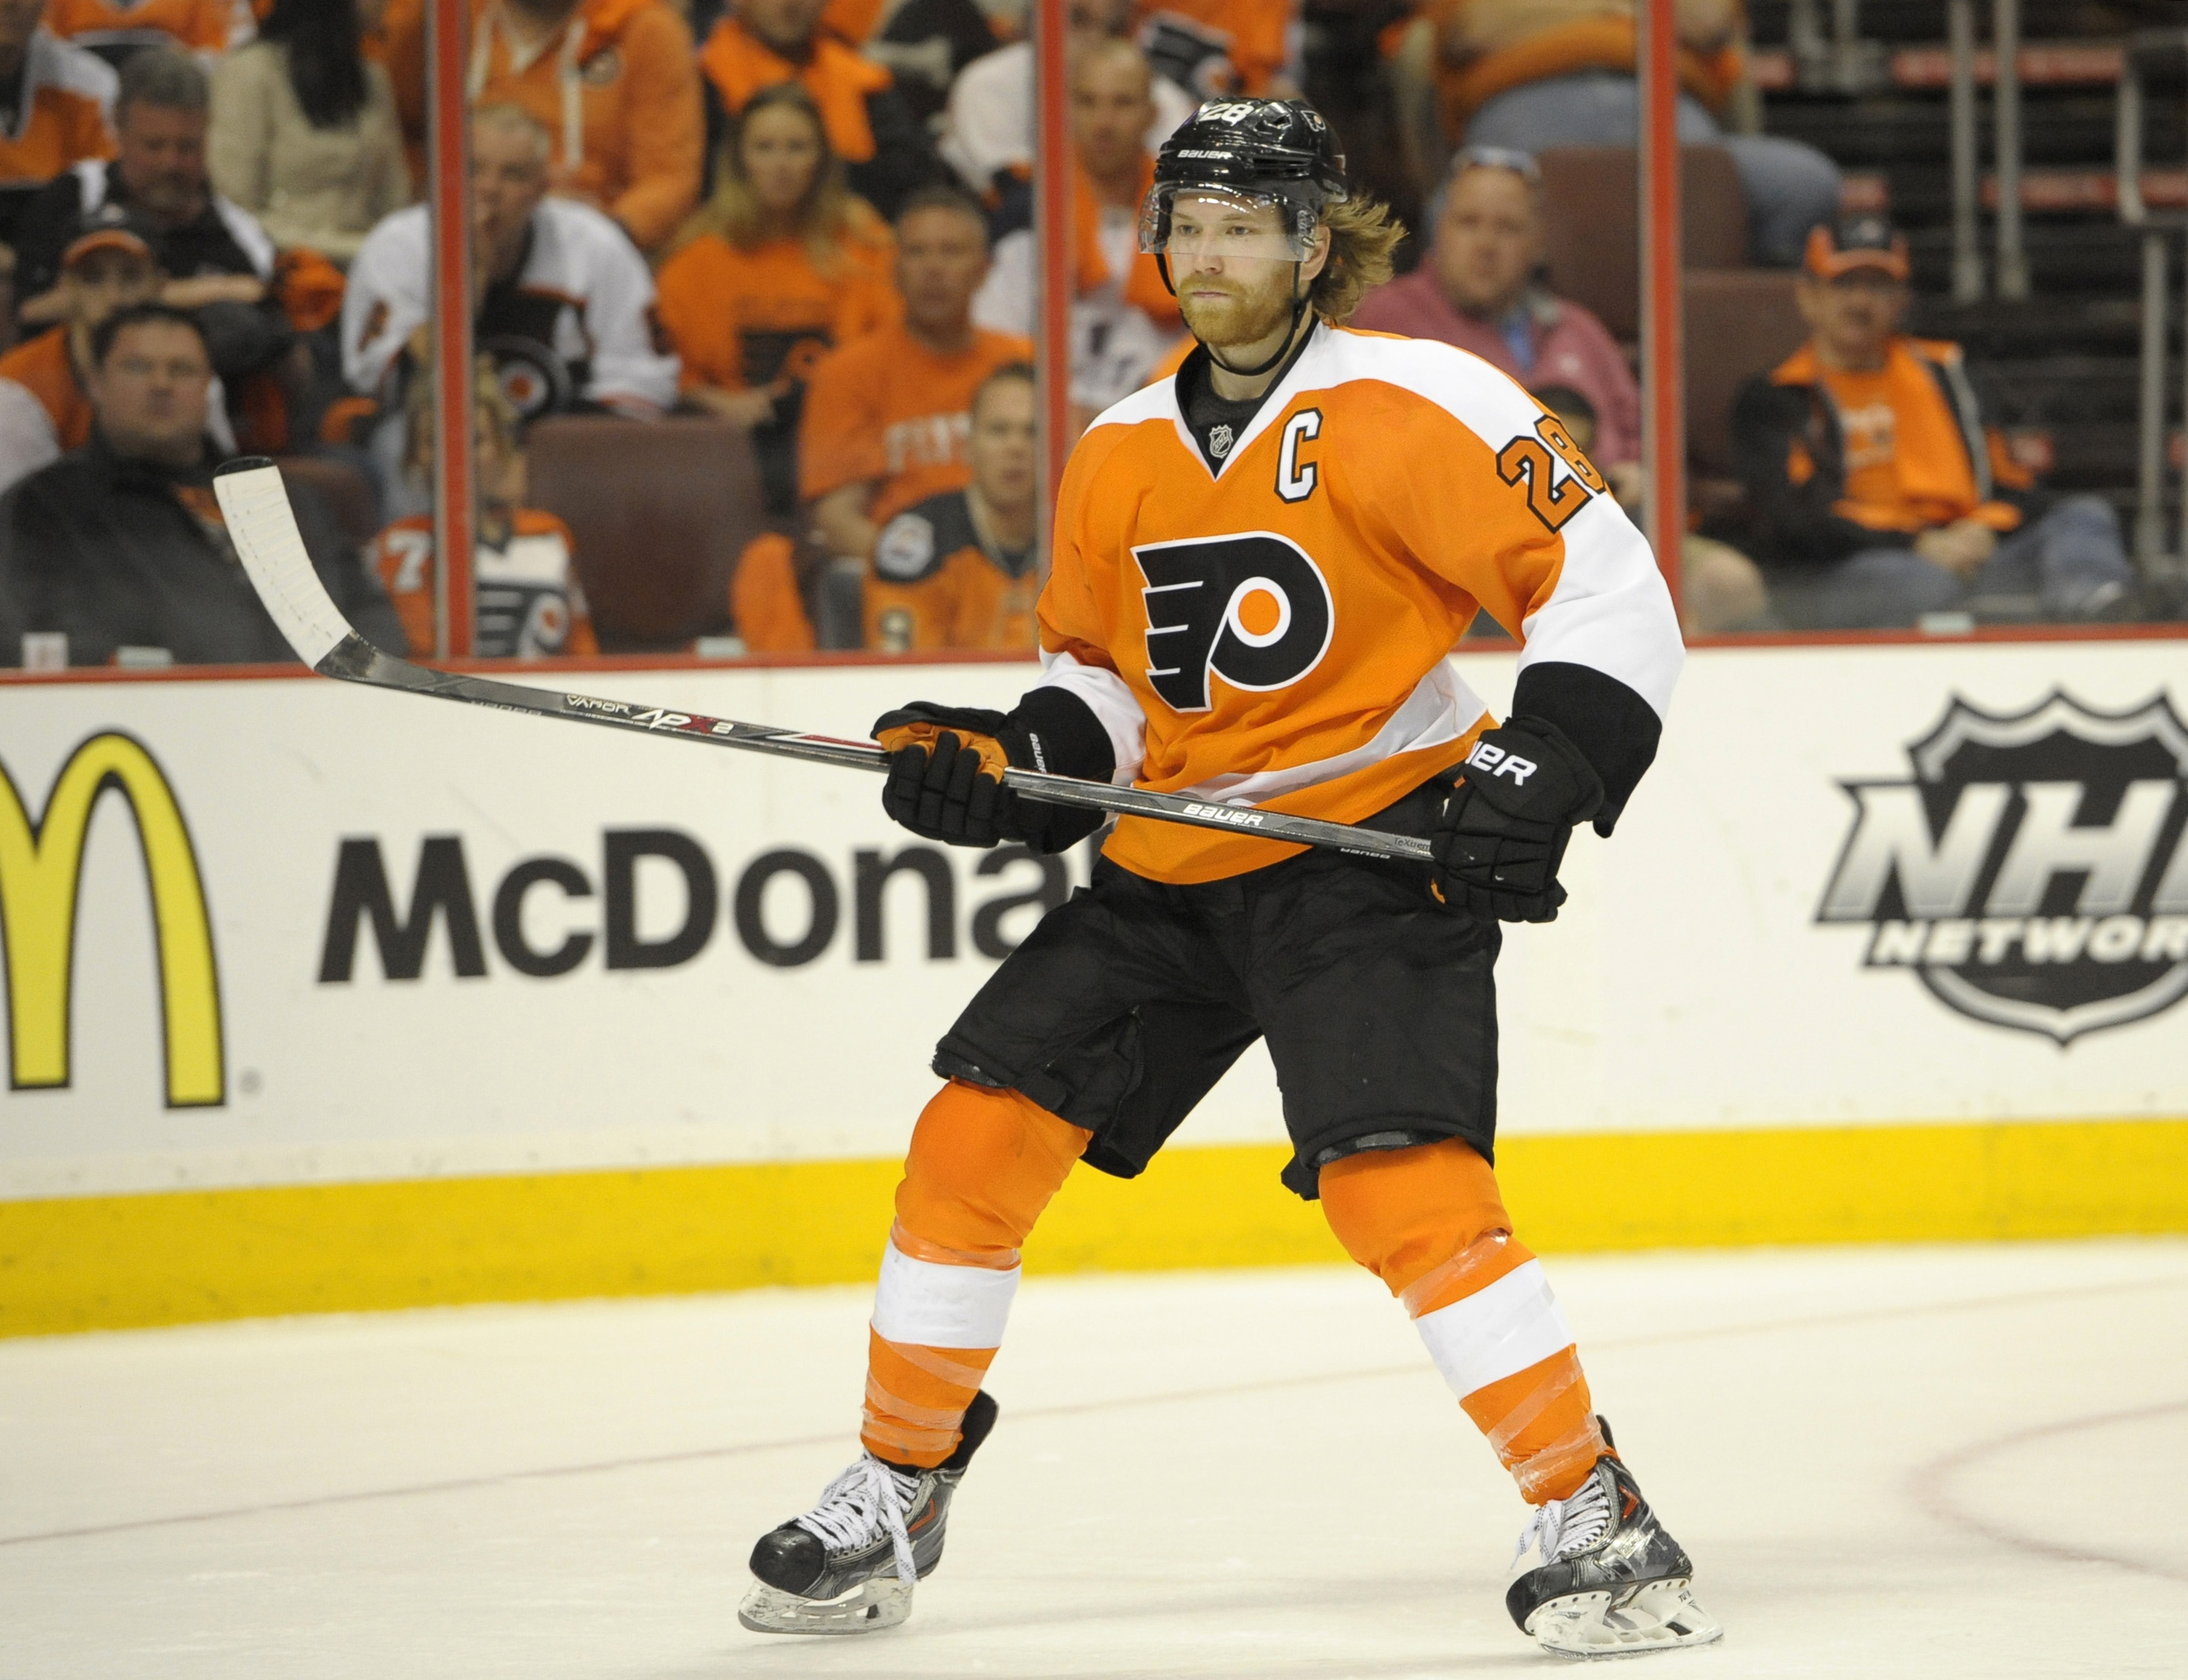 Flyers Captain Claude Giroux was drafted #22 overall by Philadelphia in 2006